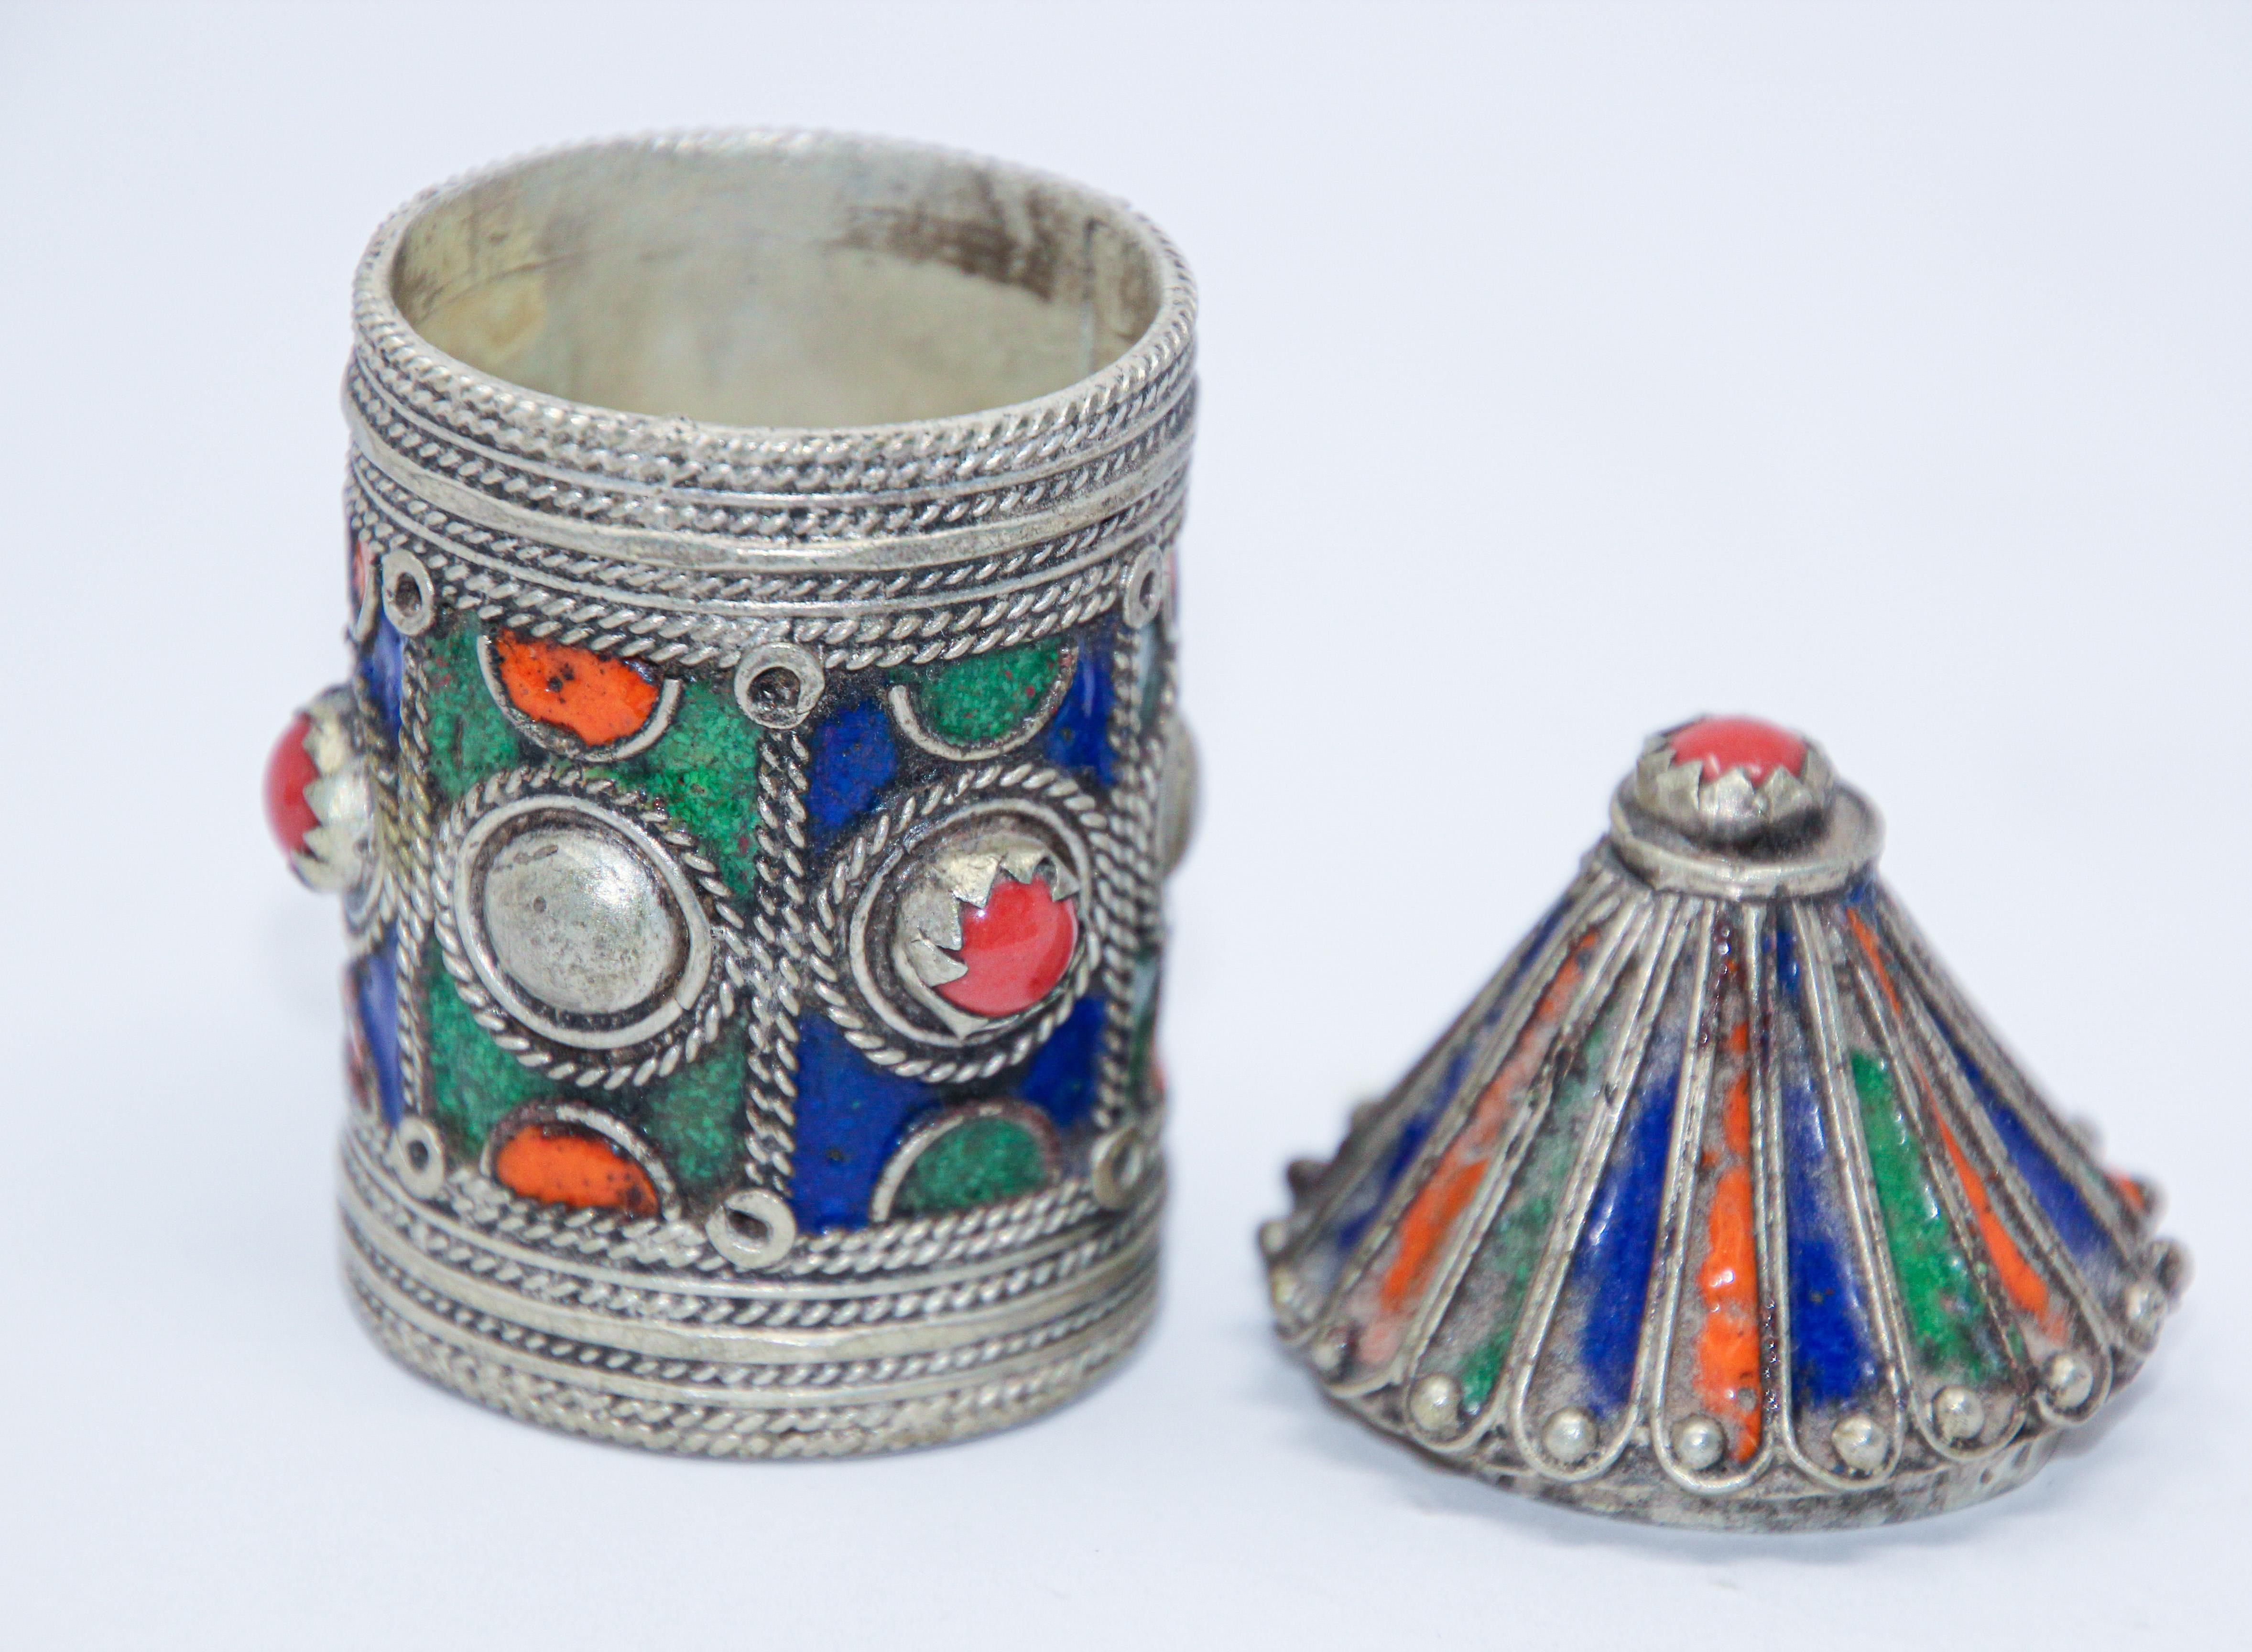 Antique Berber Kabyle box container to hold loose powder kohl eye liner.
Made of silver wash with filigree enamel in pagoda shape.
Enamel and rhinestone made of silver tone metal with filigree scales and applied enamel in red, green, orange and